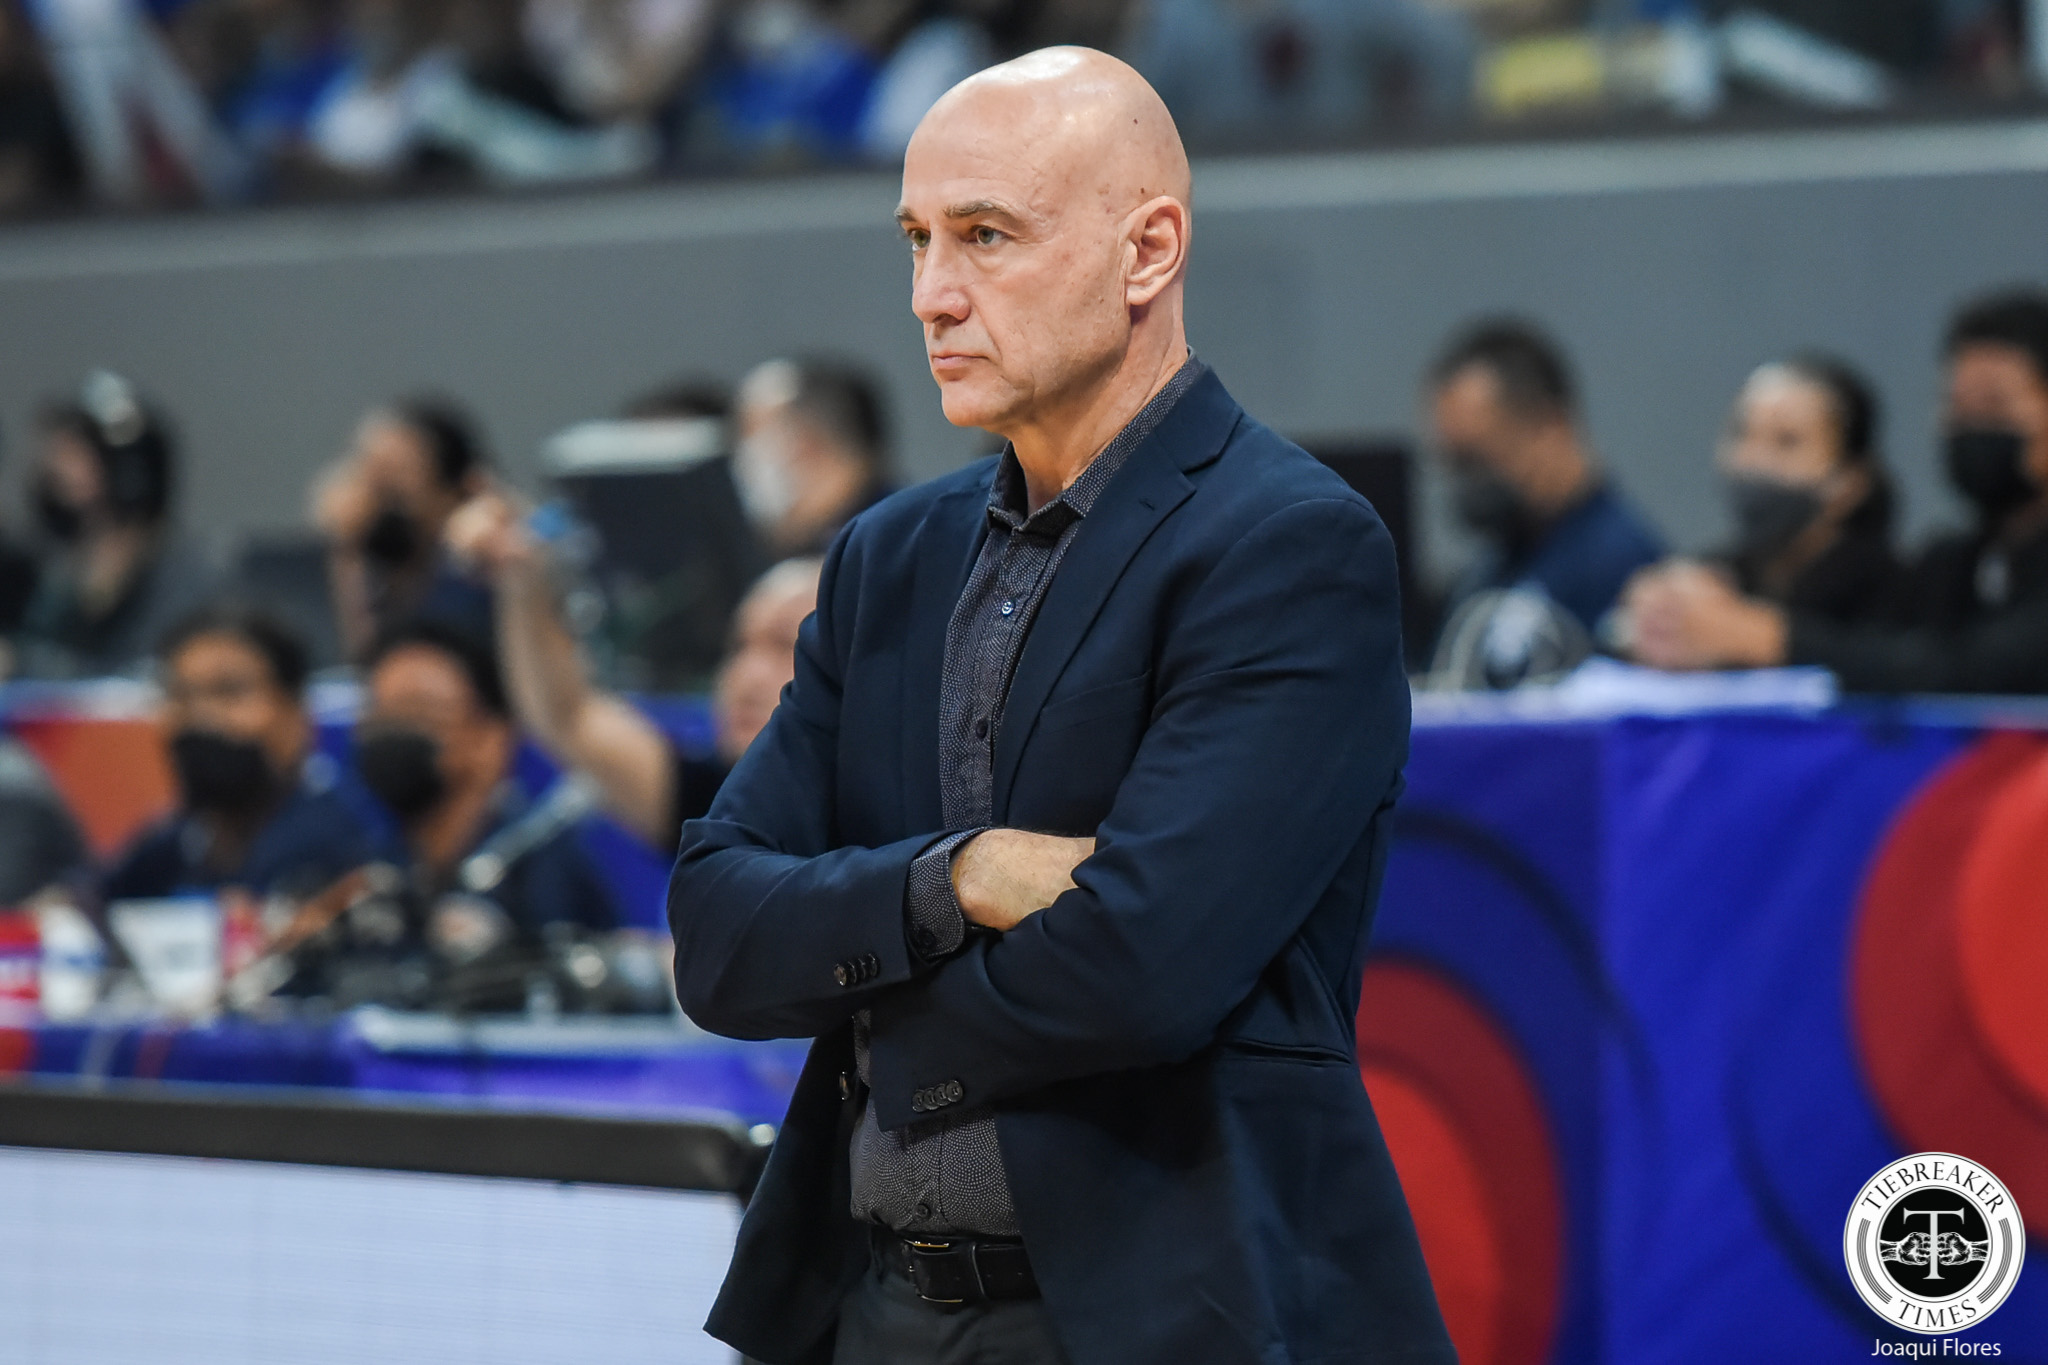 2023-FIBA-WCQ-Gilas-vs.-India-Nenad-Vucinic-4087 With Dave out for Asia Cup, Gilas looks to bring in Ray, Thirdy 2021 FIBA Asia Cup Basketball Gilas Pilipinas News  - philippine sports news